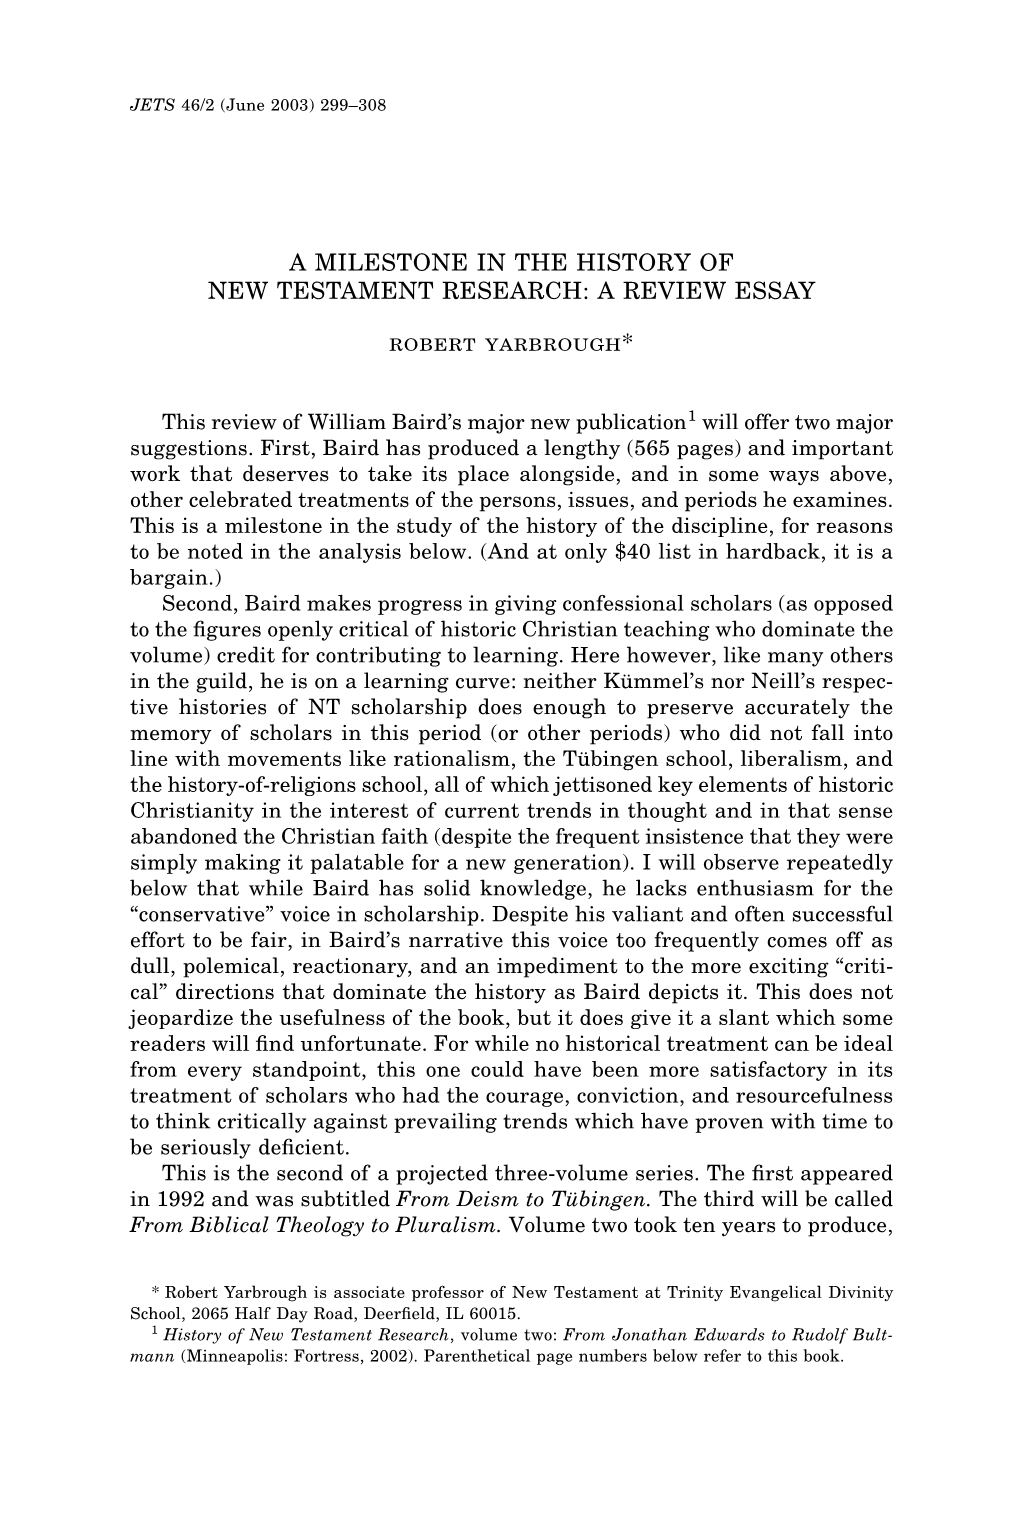 A Milestone in the History of New Testament Research: a Review Essay